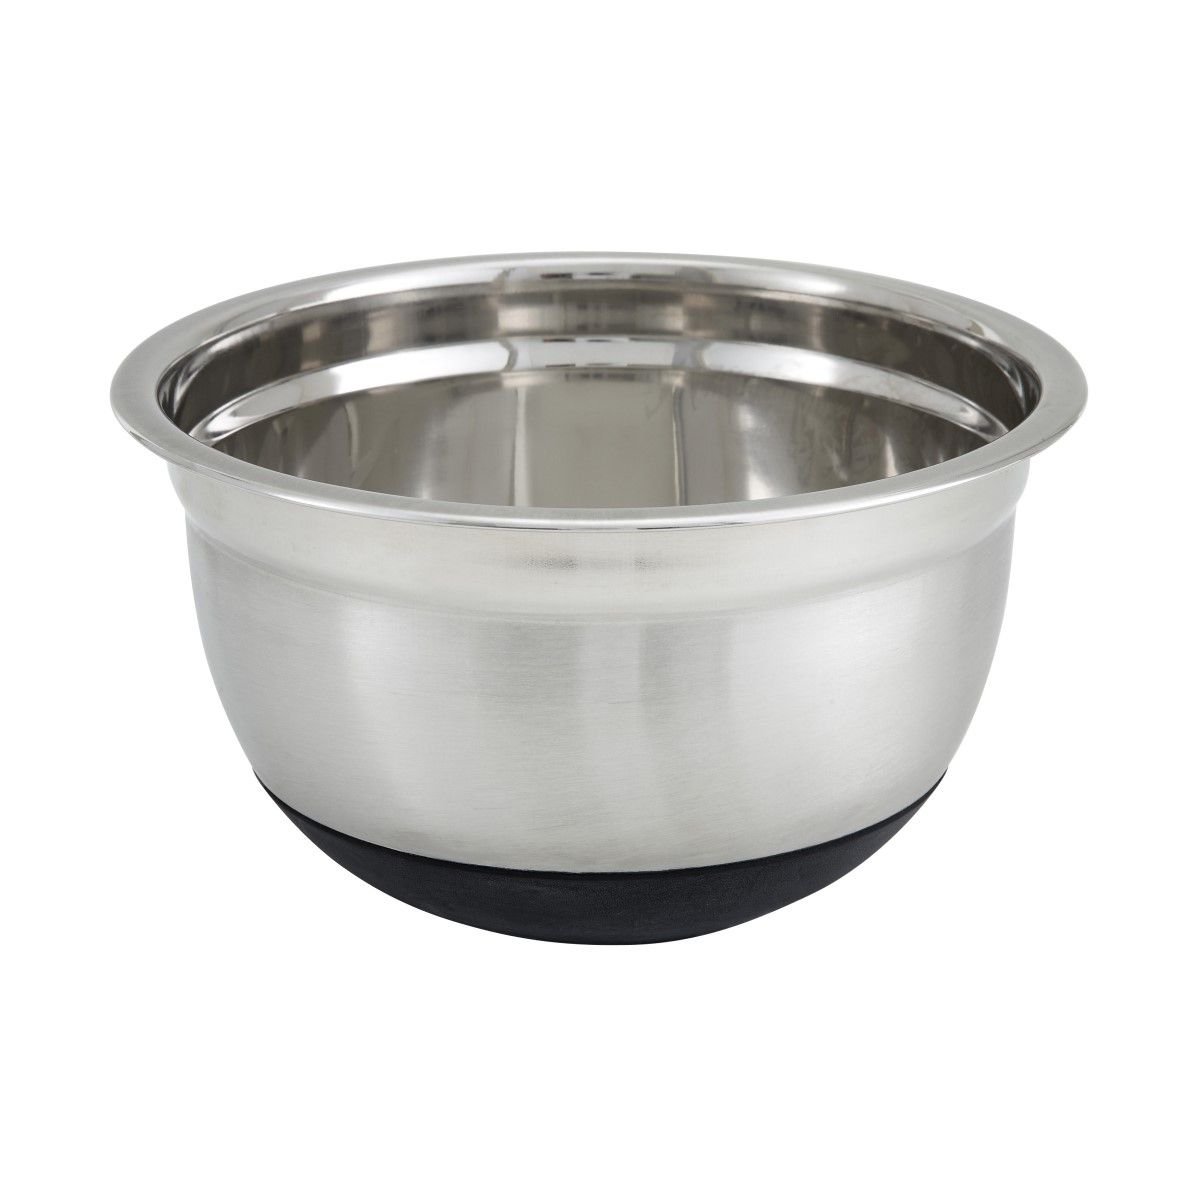 Mixing Bowl, 5 QT, Stainless Steel, Heavy Duty, Silicone Bottom, LIBERTY  WARE MB05SB